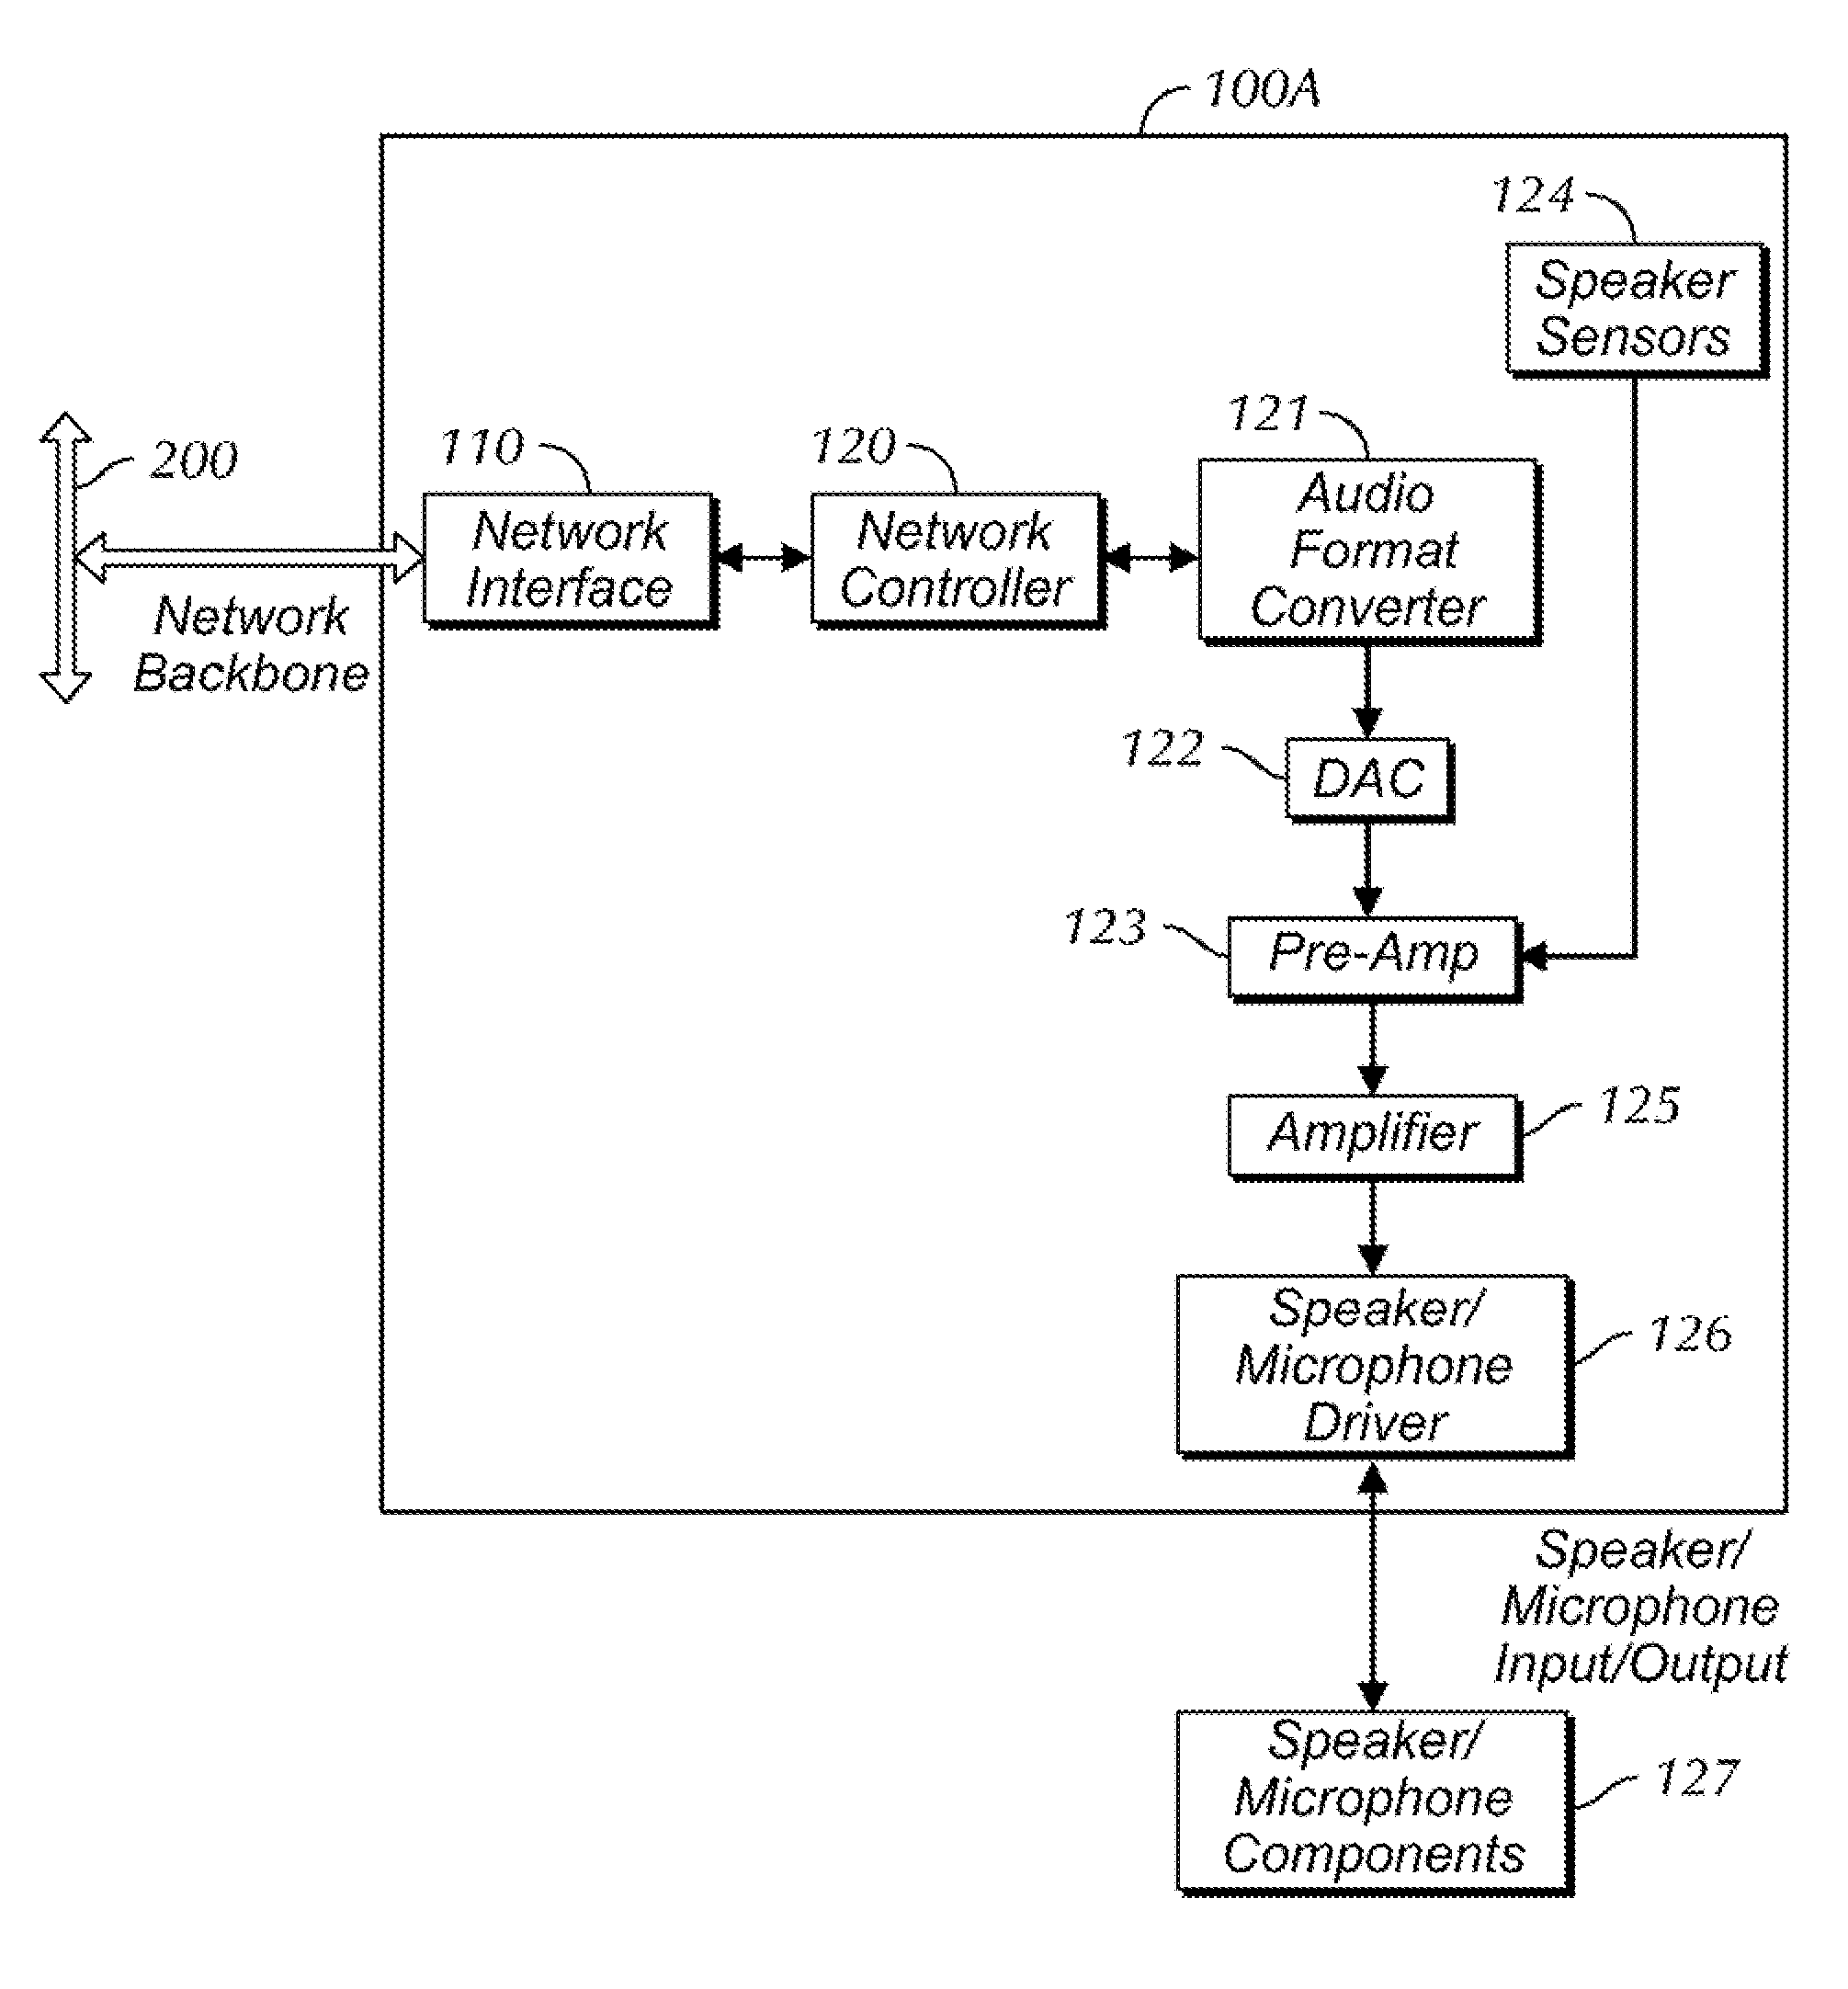 Network Speaker for an Audio Network Distribution System